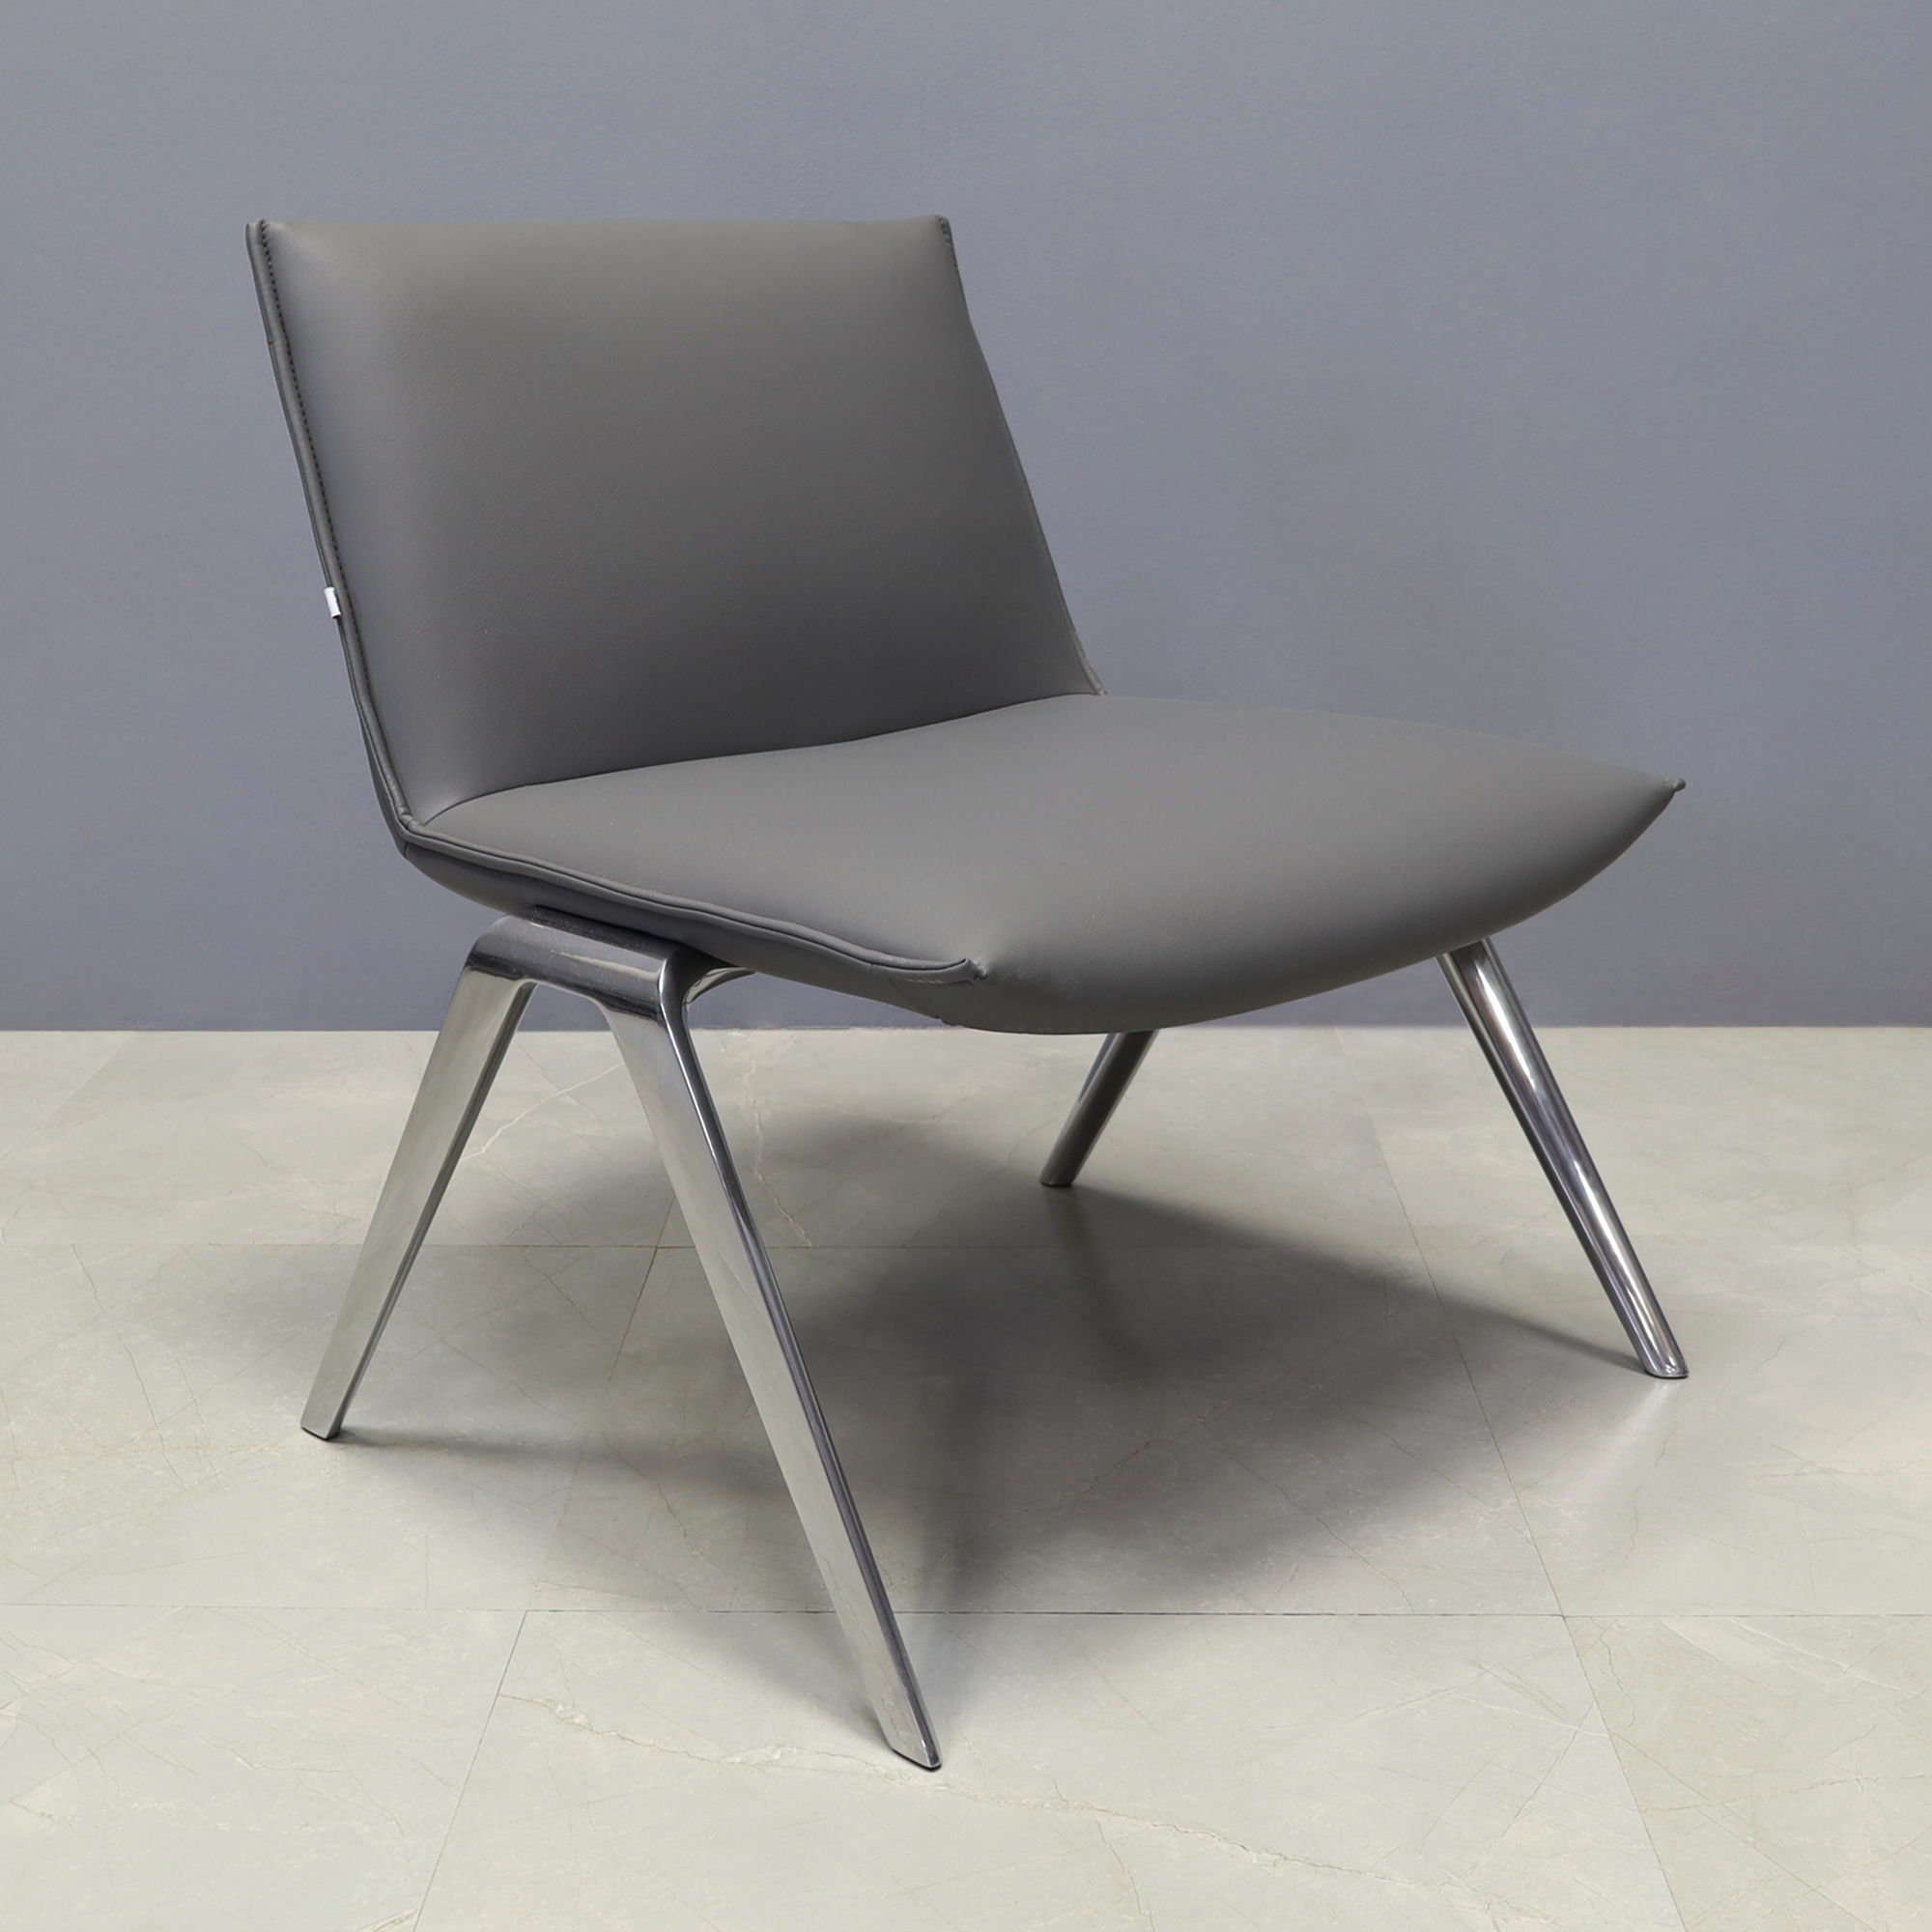 Monterra Lobby Chair in gray leatherette, shown here.